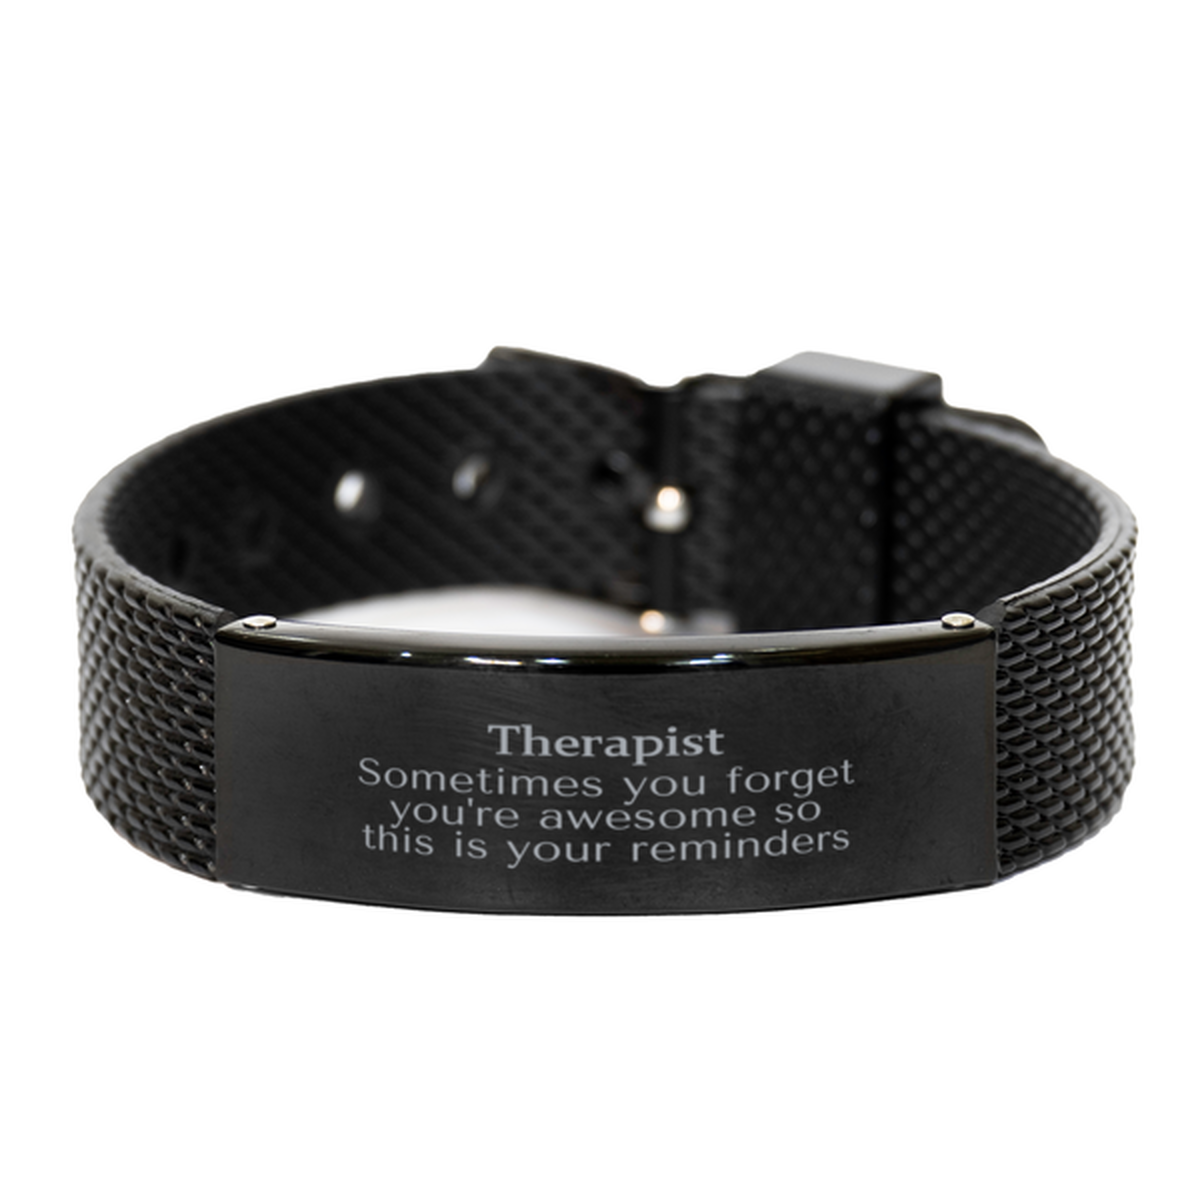 Sentimental Therapist Black Shark Mesh Bracelet, Therapist Sometimes you forget you're awesome so this is your reminders, Graduation Christmas Birthday Gifts for Therapist, Men, Women, Coworkers